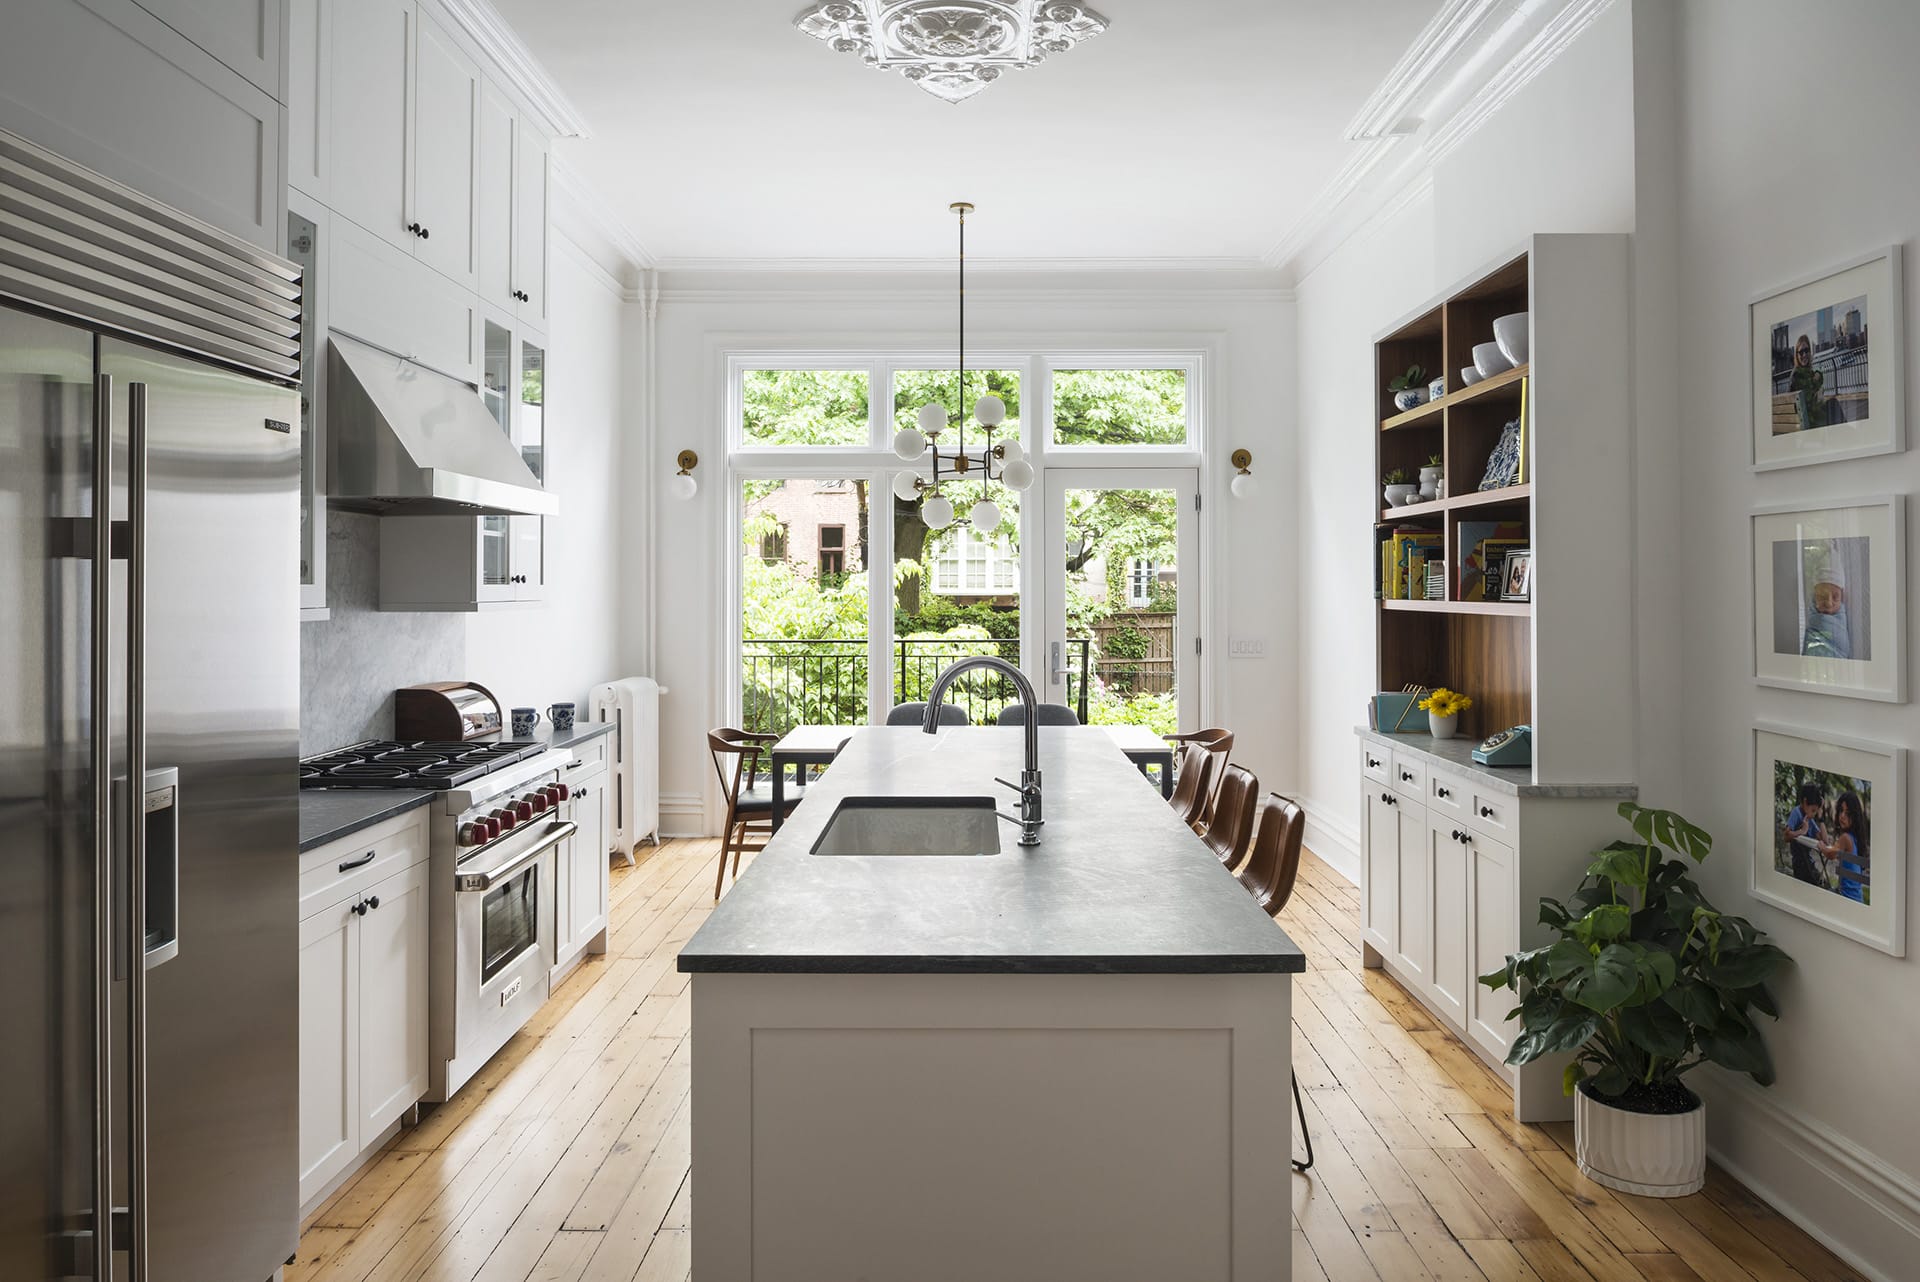 Renovated parlor floor of a Cobble Hill townhouse with natural wood floors, large glass doors leading to the backyard, and all-white walls and cabinetry.